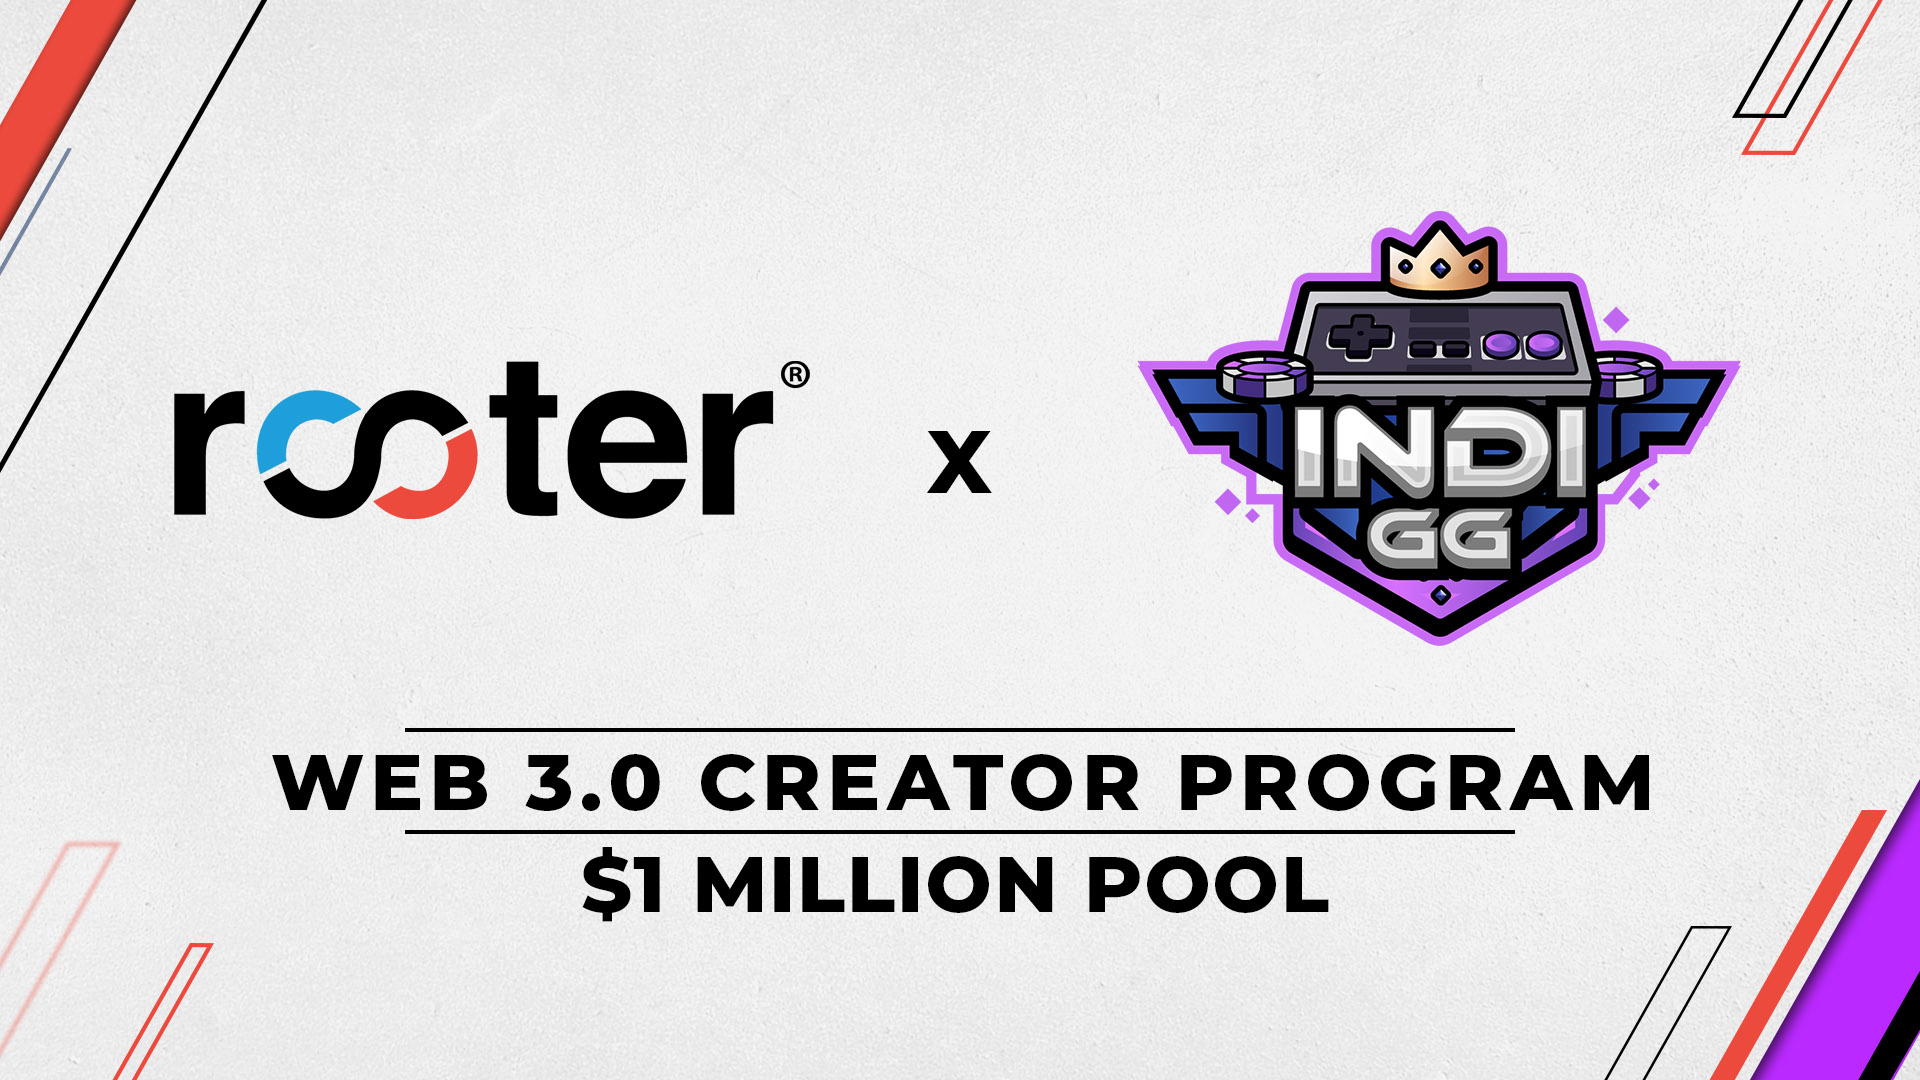 Rooter partners with Polygon and YGG backed gaming guild - IndiGG, to launch ‘Rooter.GG x Indi.GG Web3 Creator Program’; the first cohort to start from April 10th